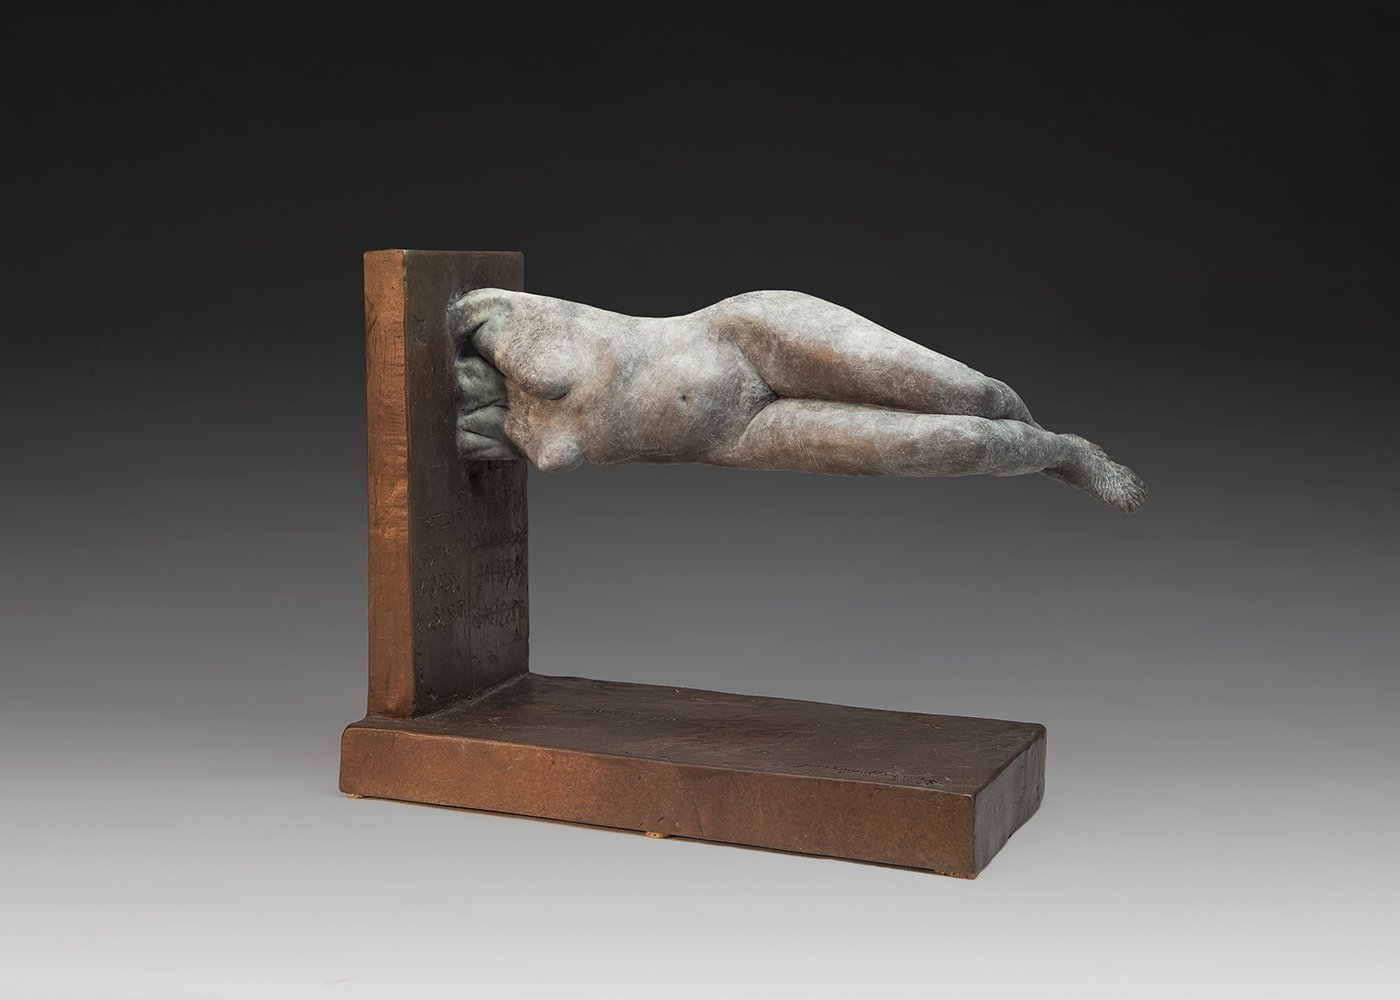 Yves  Goyatton: 'Weighless', 2016 Bronze Sculpture, Figurative. Yves Goyatton bronze contemporary sculpture was created in 2016 Weightless is a tribute to life. This body is floating but remains strong defying gravitational pull. Like an imaginary line who can represent the good bad of human spirit. ...